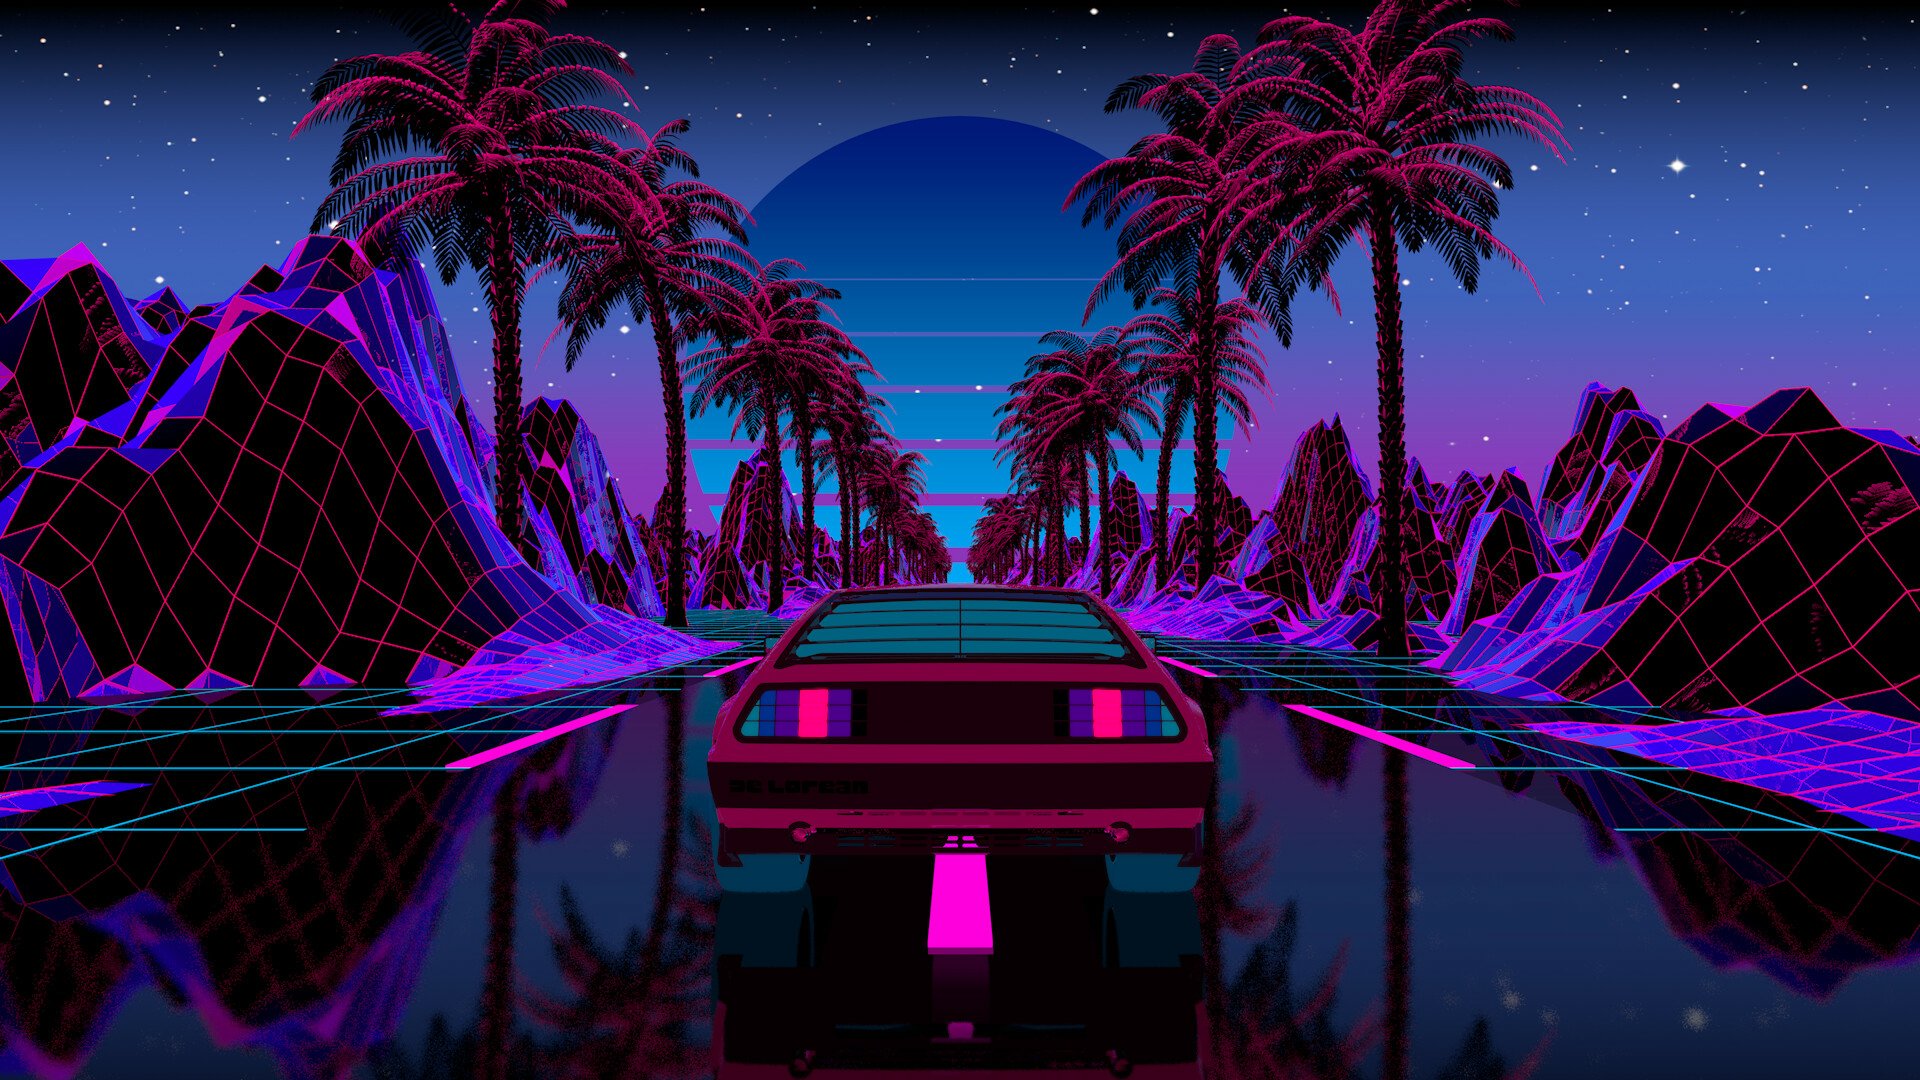 Retro Wave HD Wallpaper | Background Image | 1920x1080 - Wallpaper Abyss